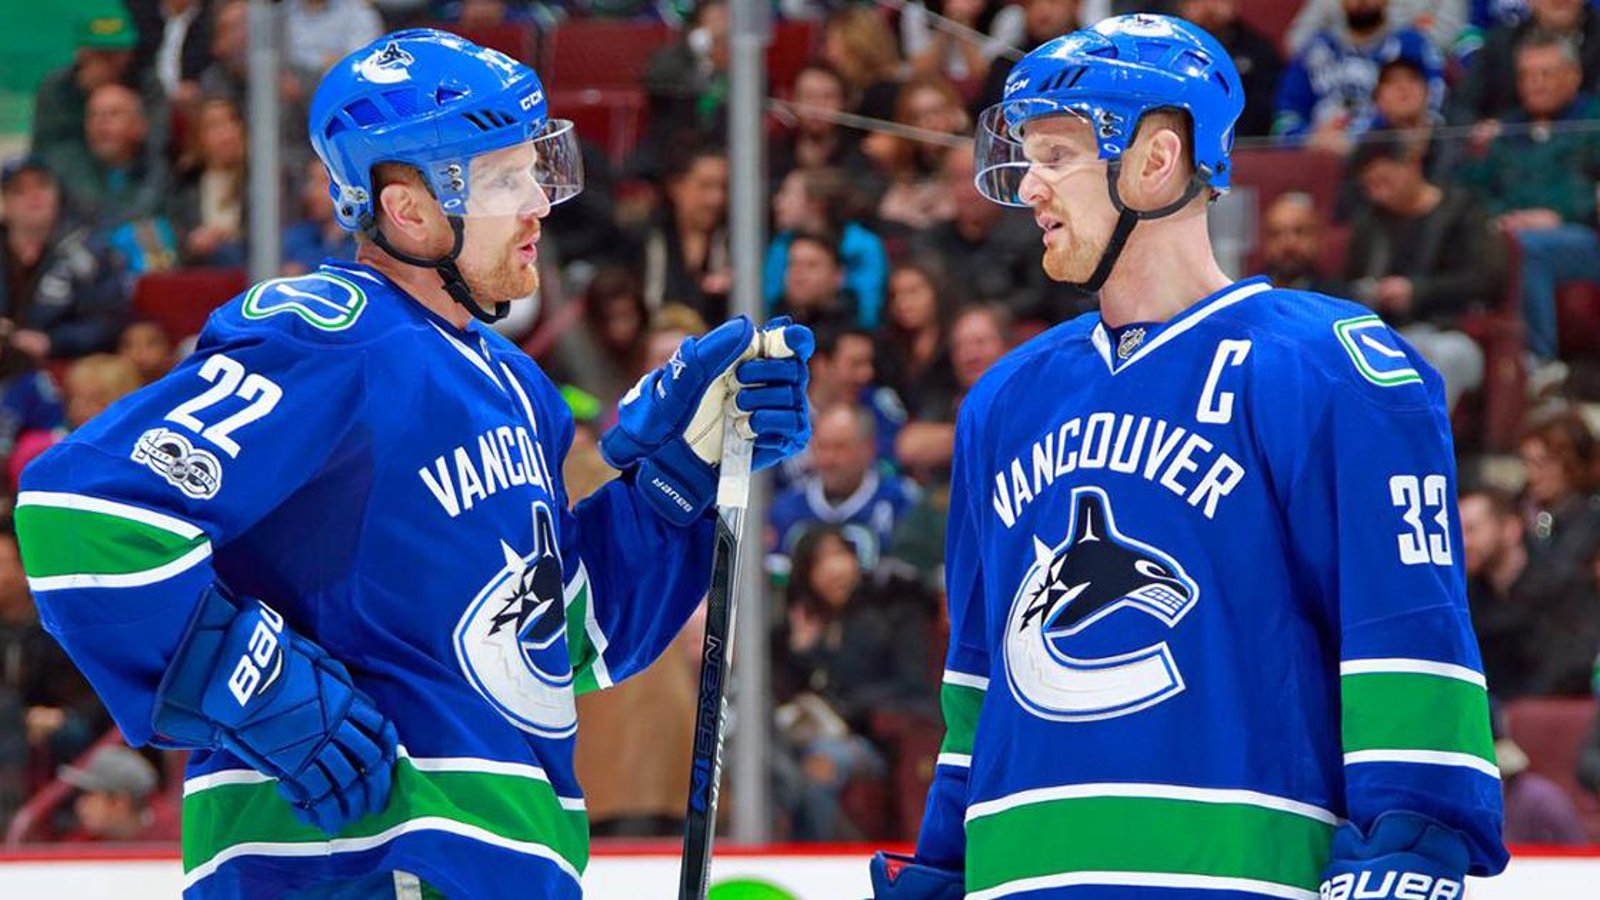 Your Call: Should the Canucks re-sign the Sedins?